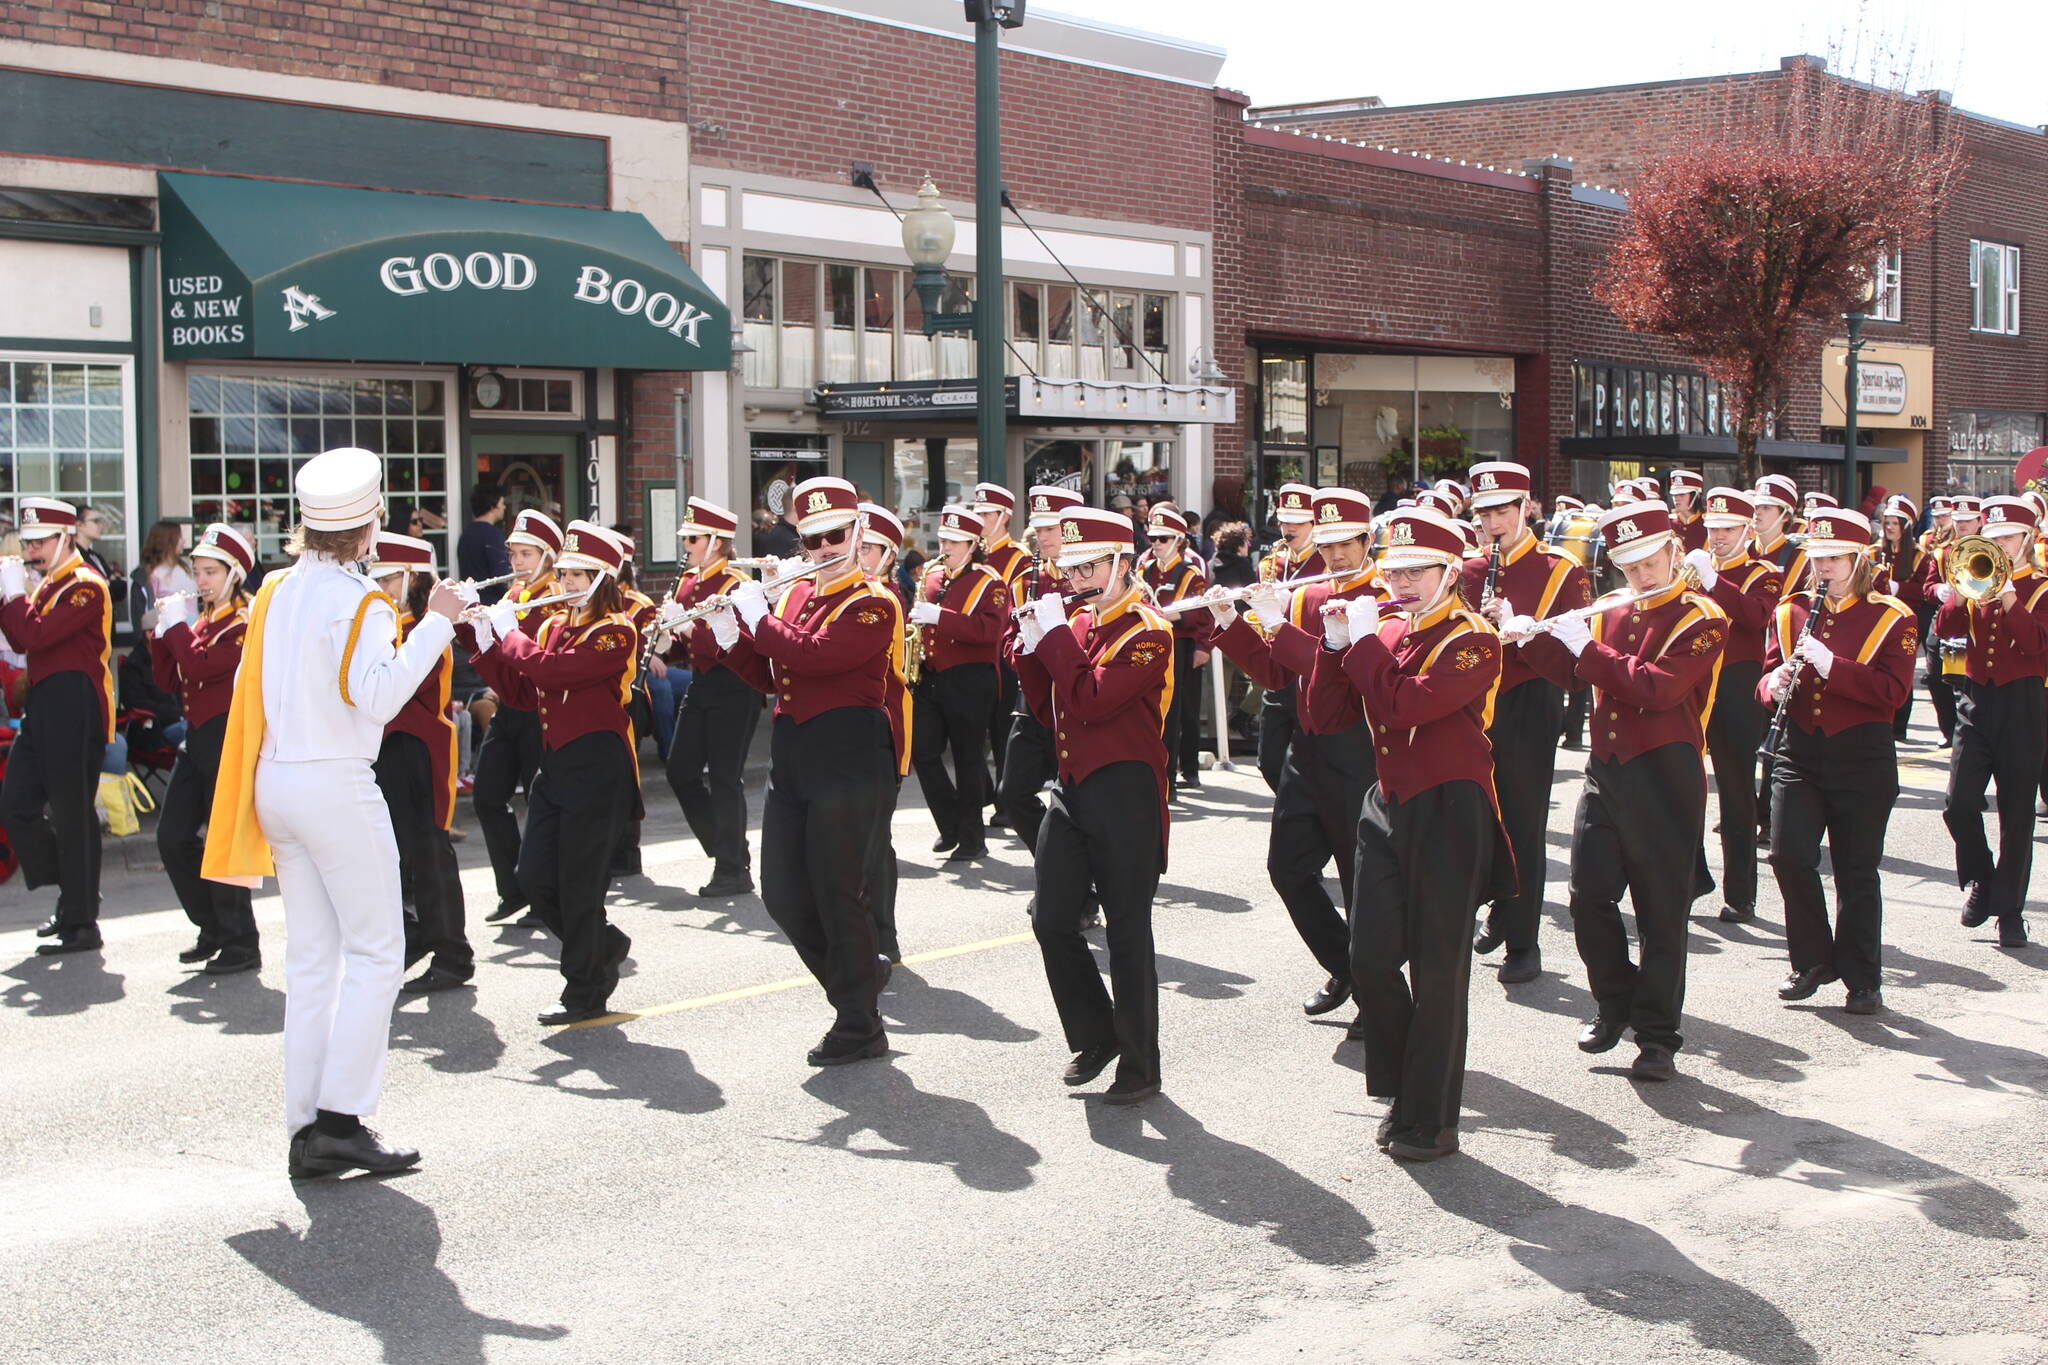 The White River Hornets perform during the Parade’s stretch through Sumner. Photo by Ray-Miller Still